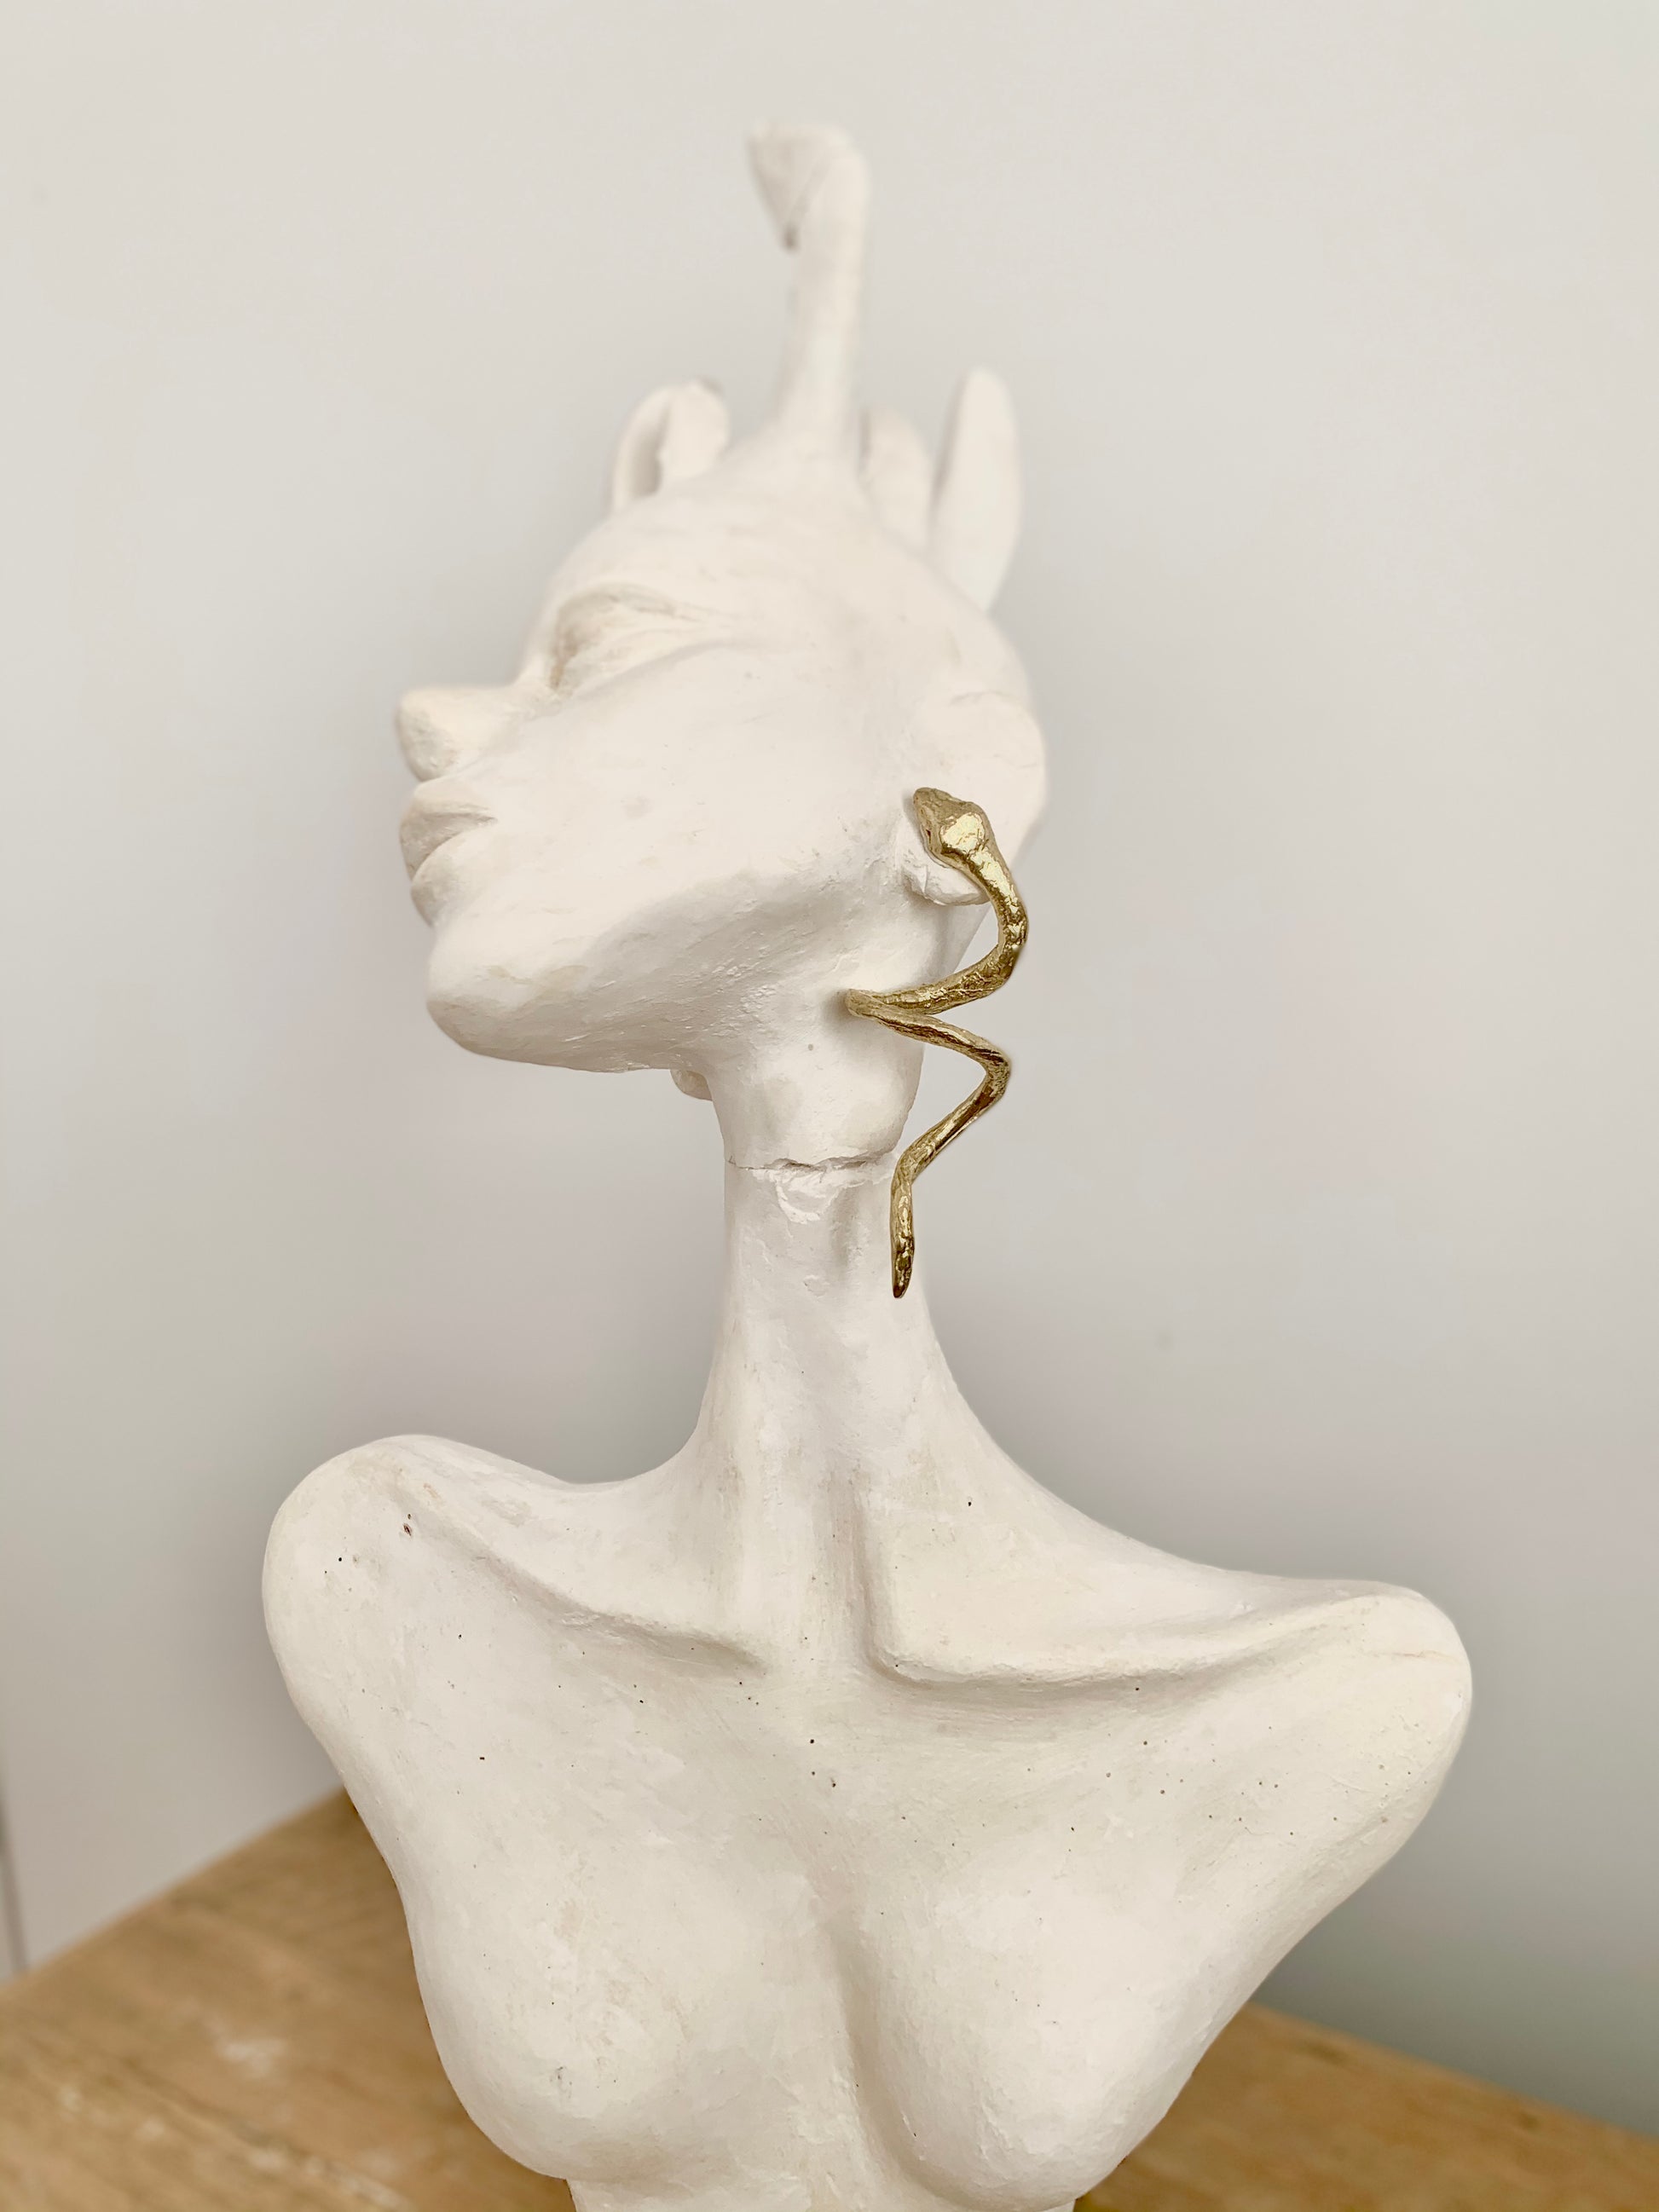 curled snake earring 602Lab